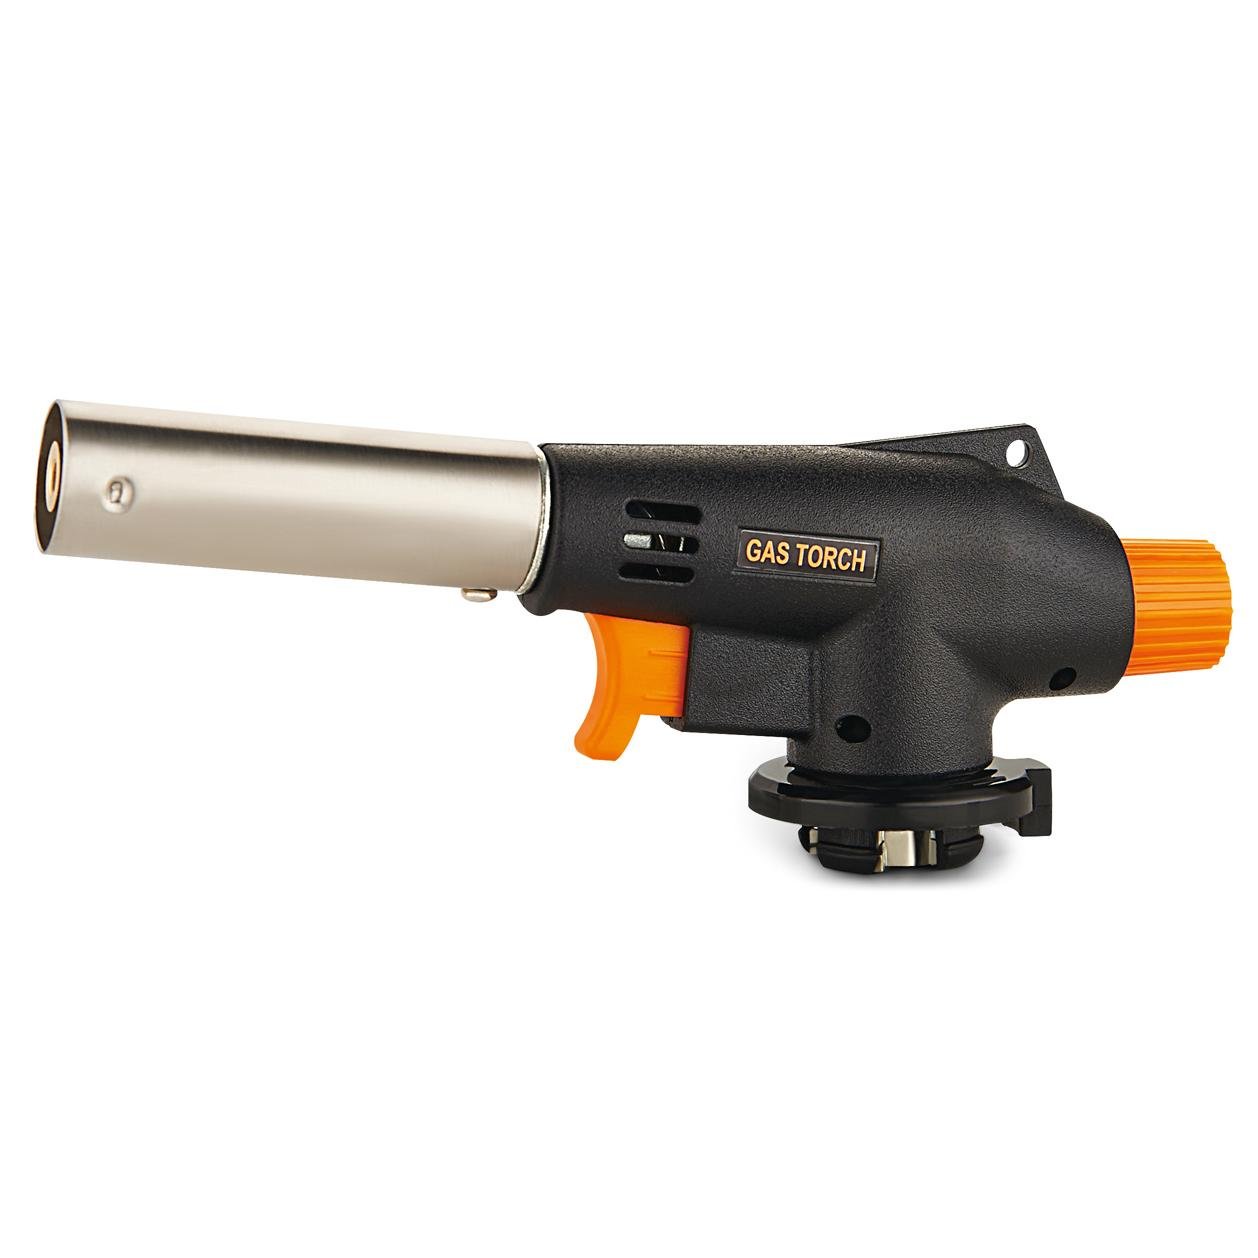 SY-8809 Gas torch     1